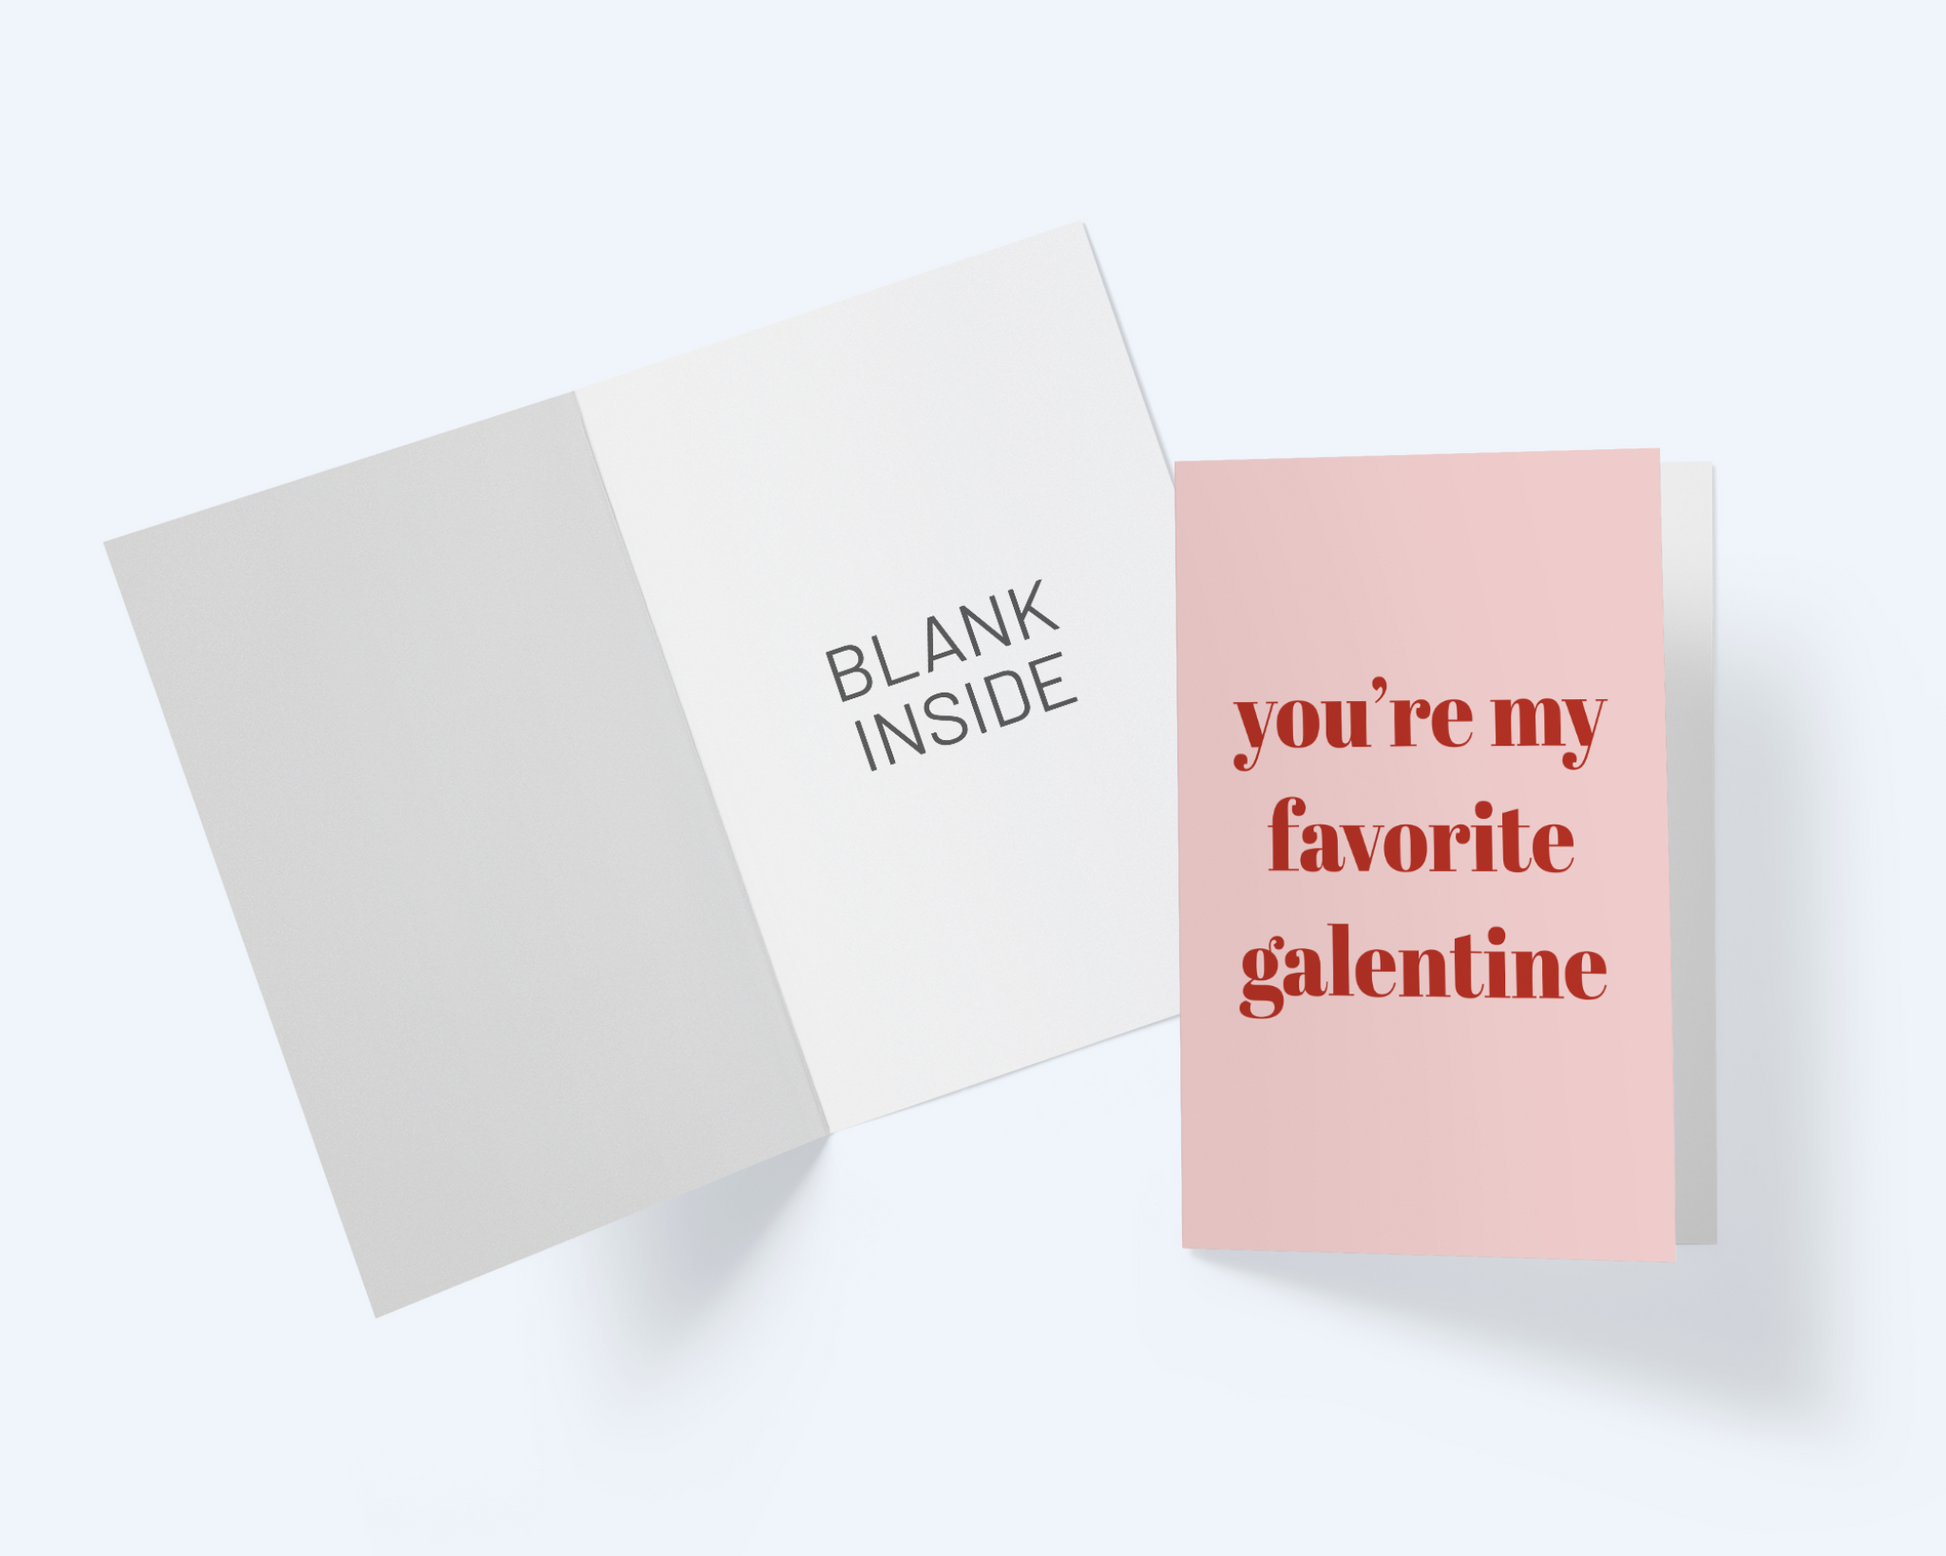 Galentine's Day Greeting Card: You're My Favorite Galentine.